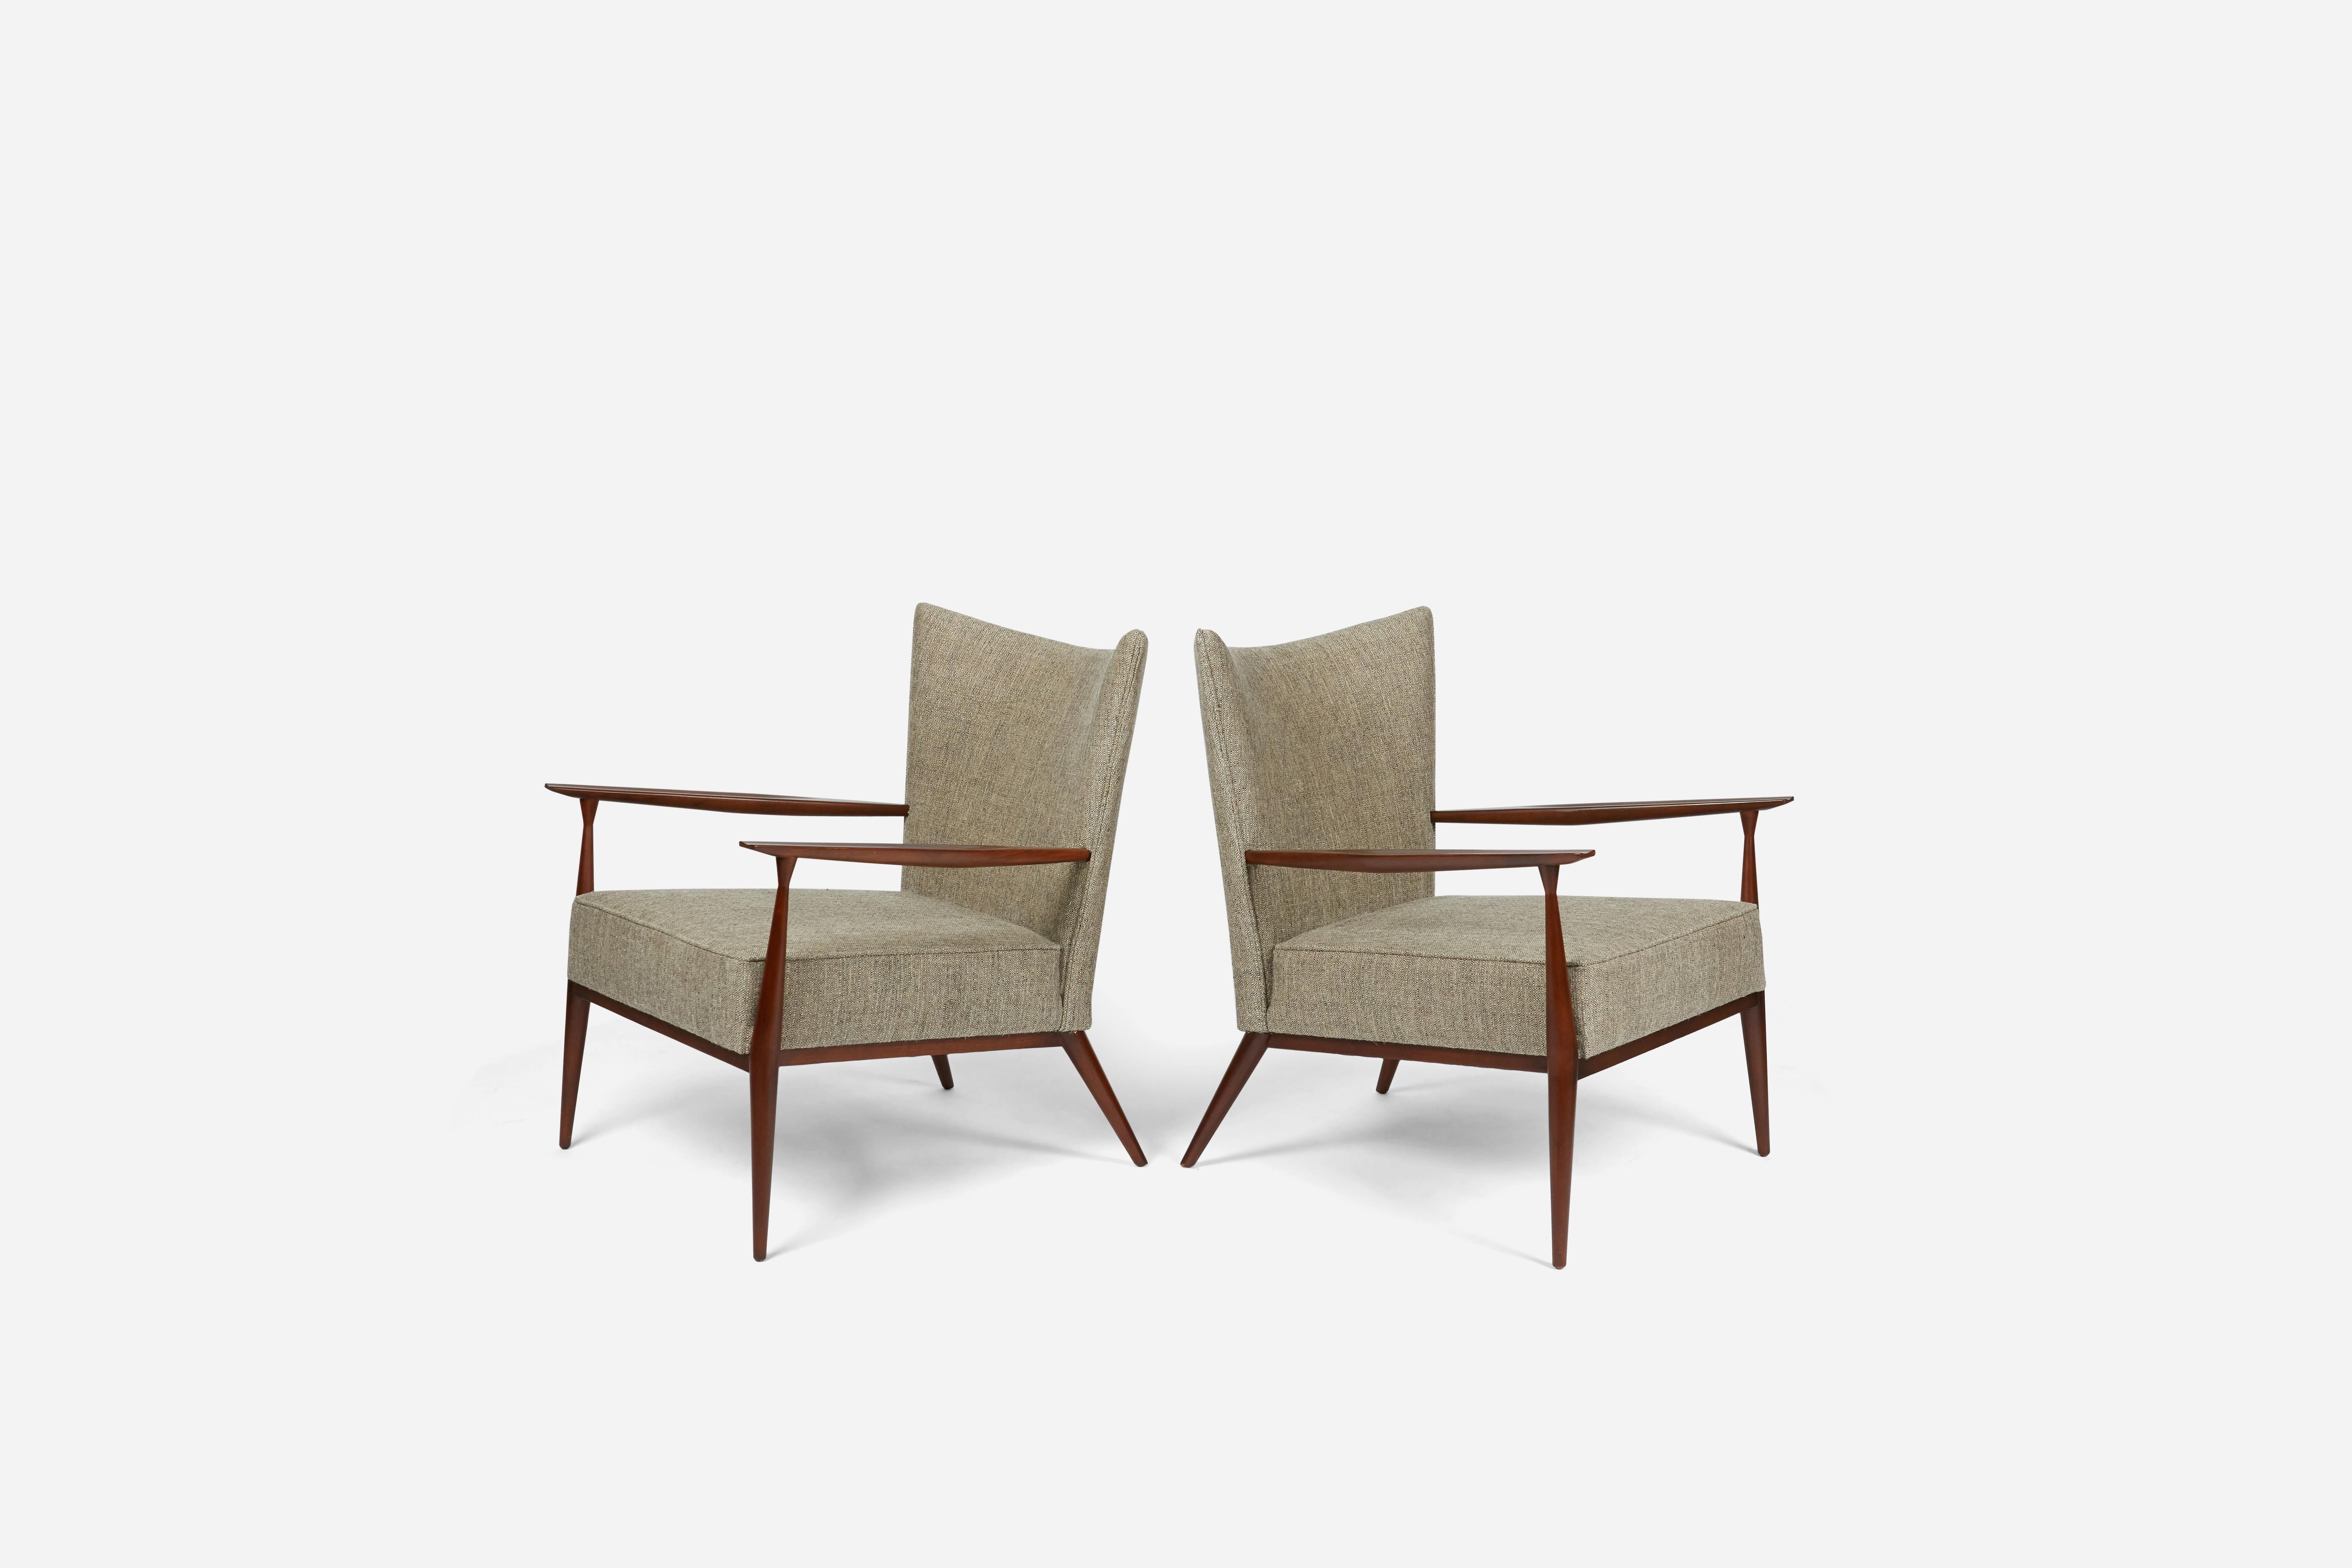 Handsome pair of Paul McCobb designed lounge chairs. Model #1328 for Directional Furniture. Fully restored. Refinished walnut frames, new upholstery.